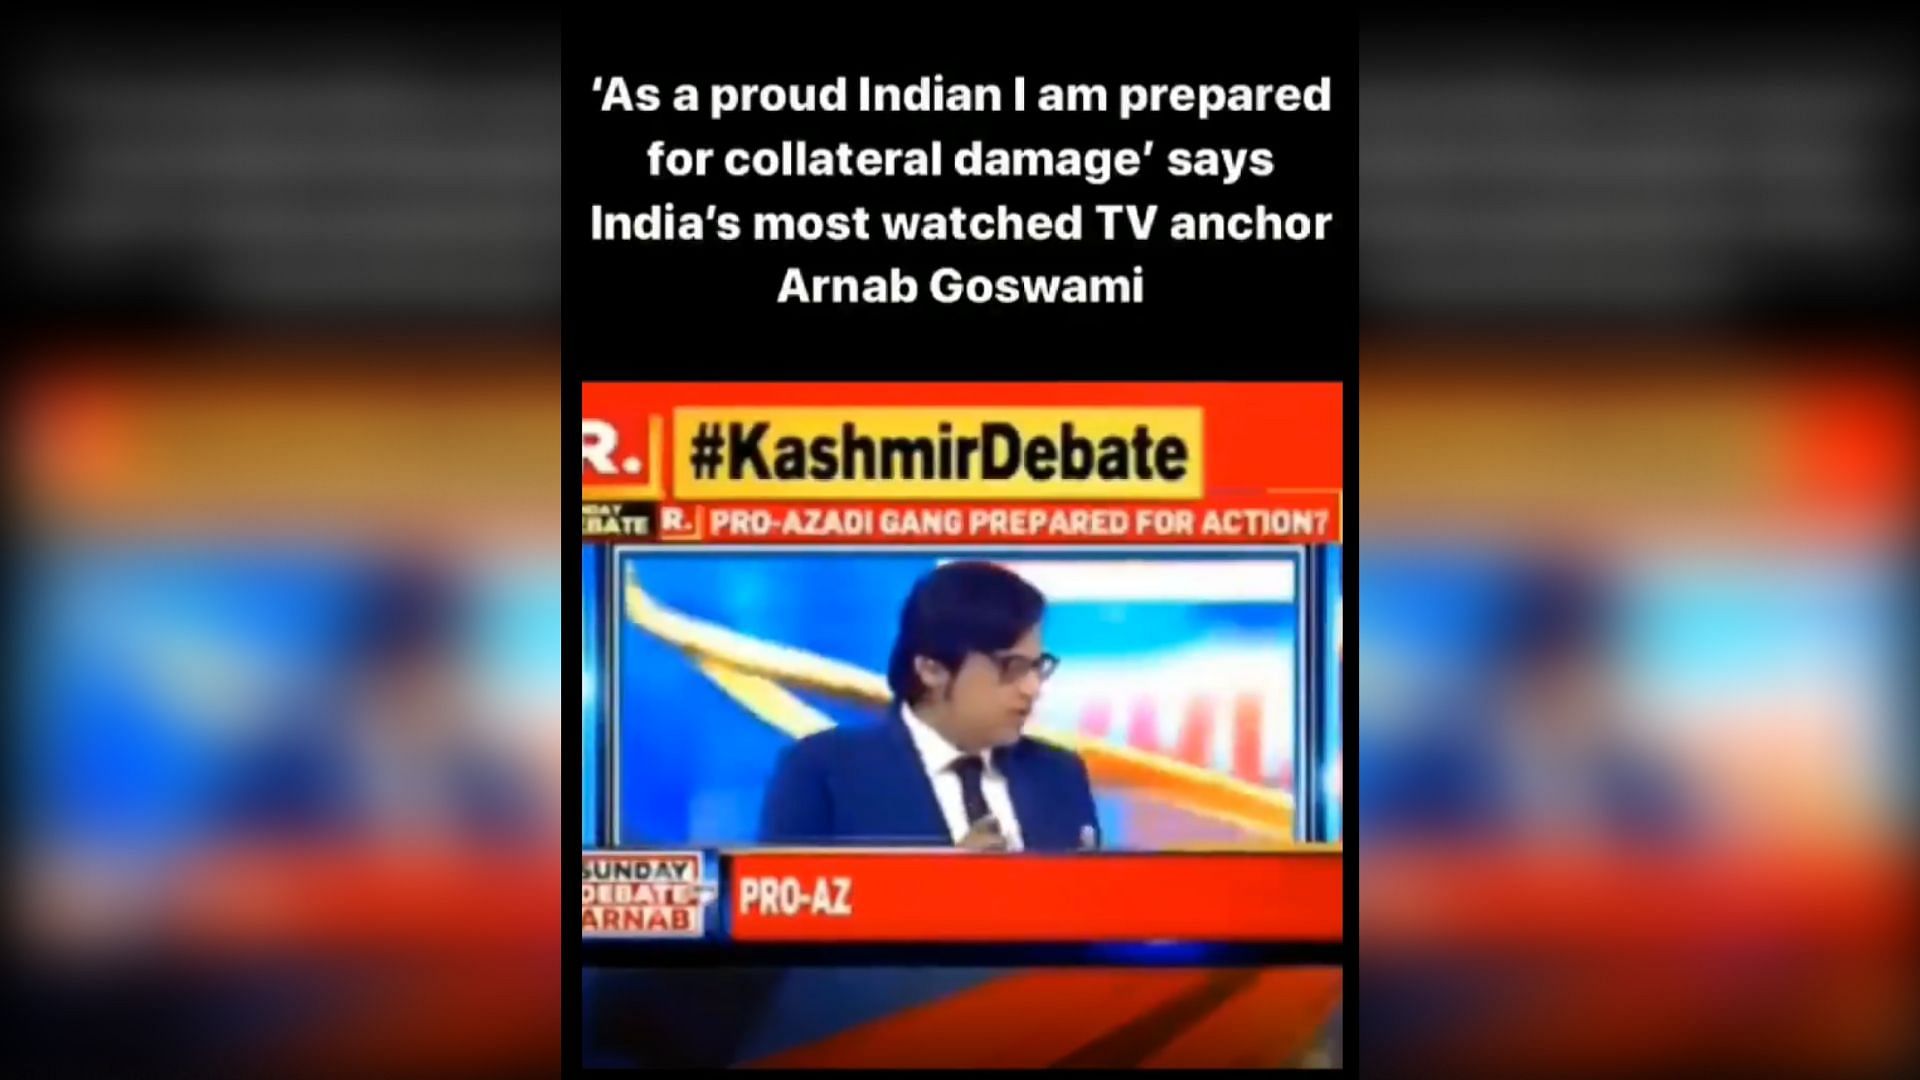 The video was shared on Wednesday amid the situation in Kashmir after the revocation of Article 370.